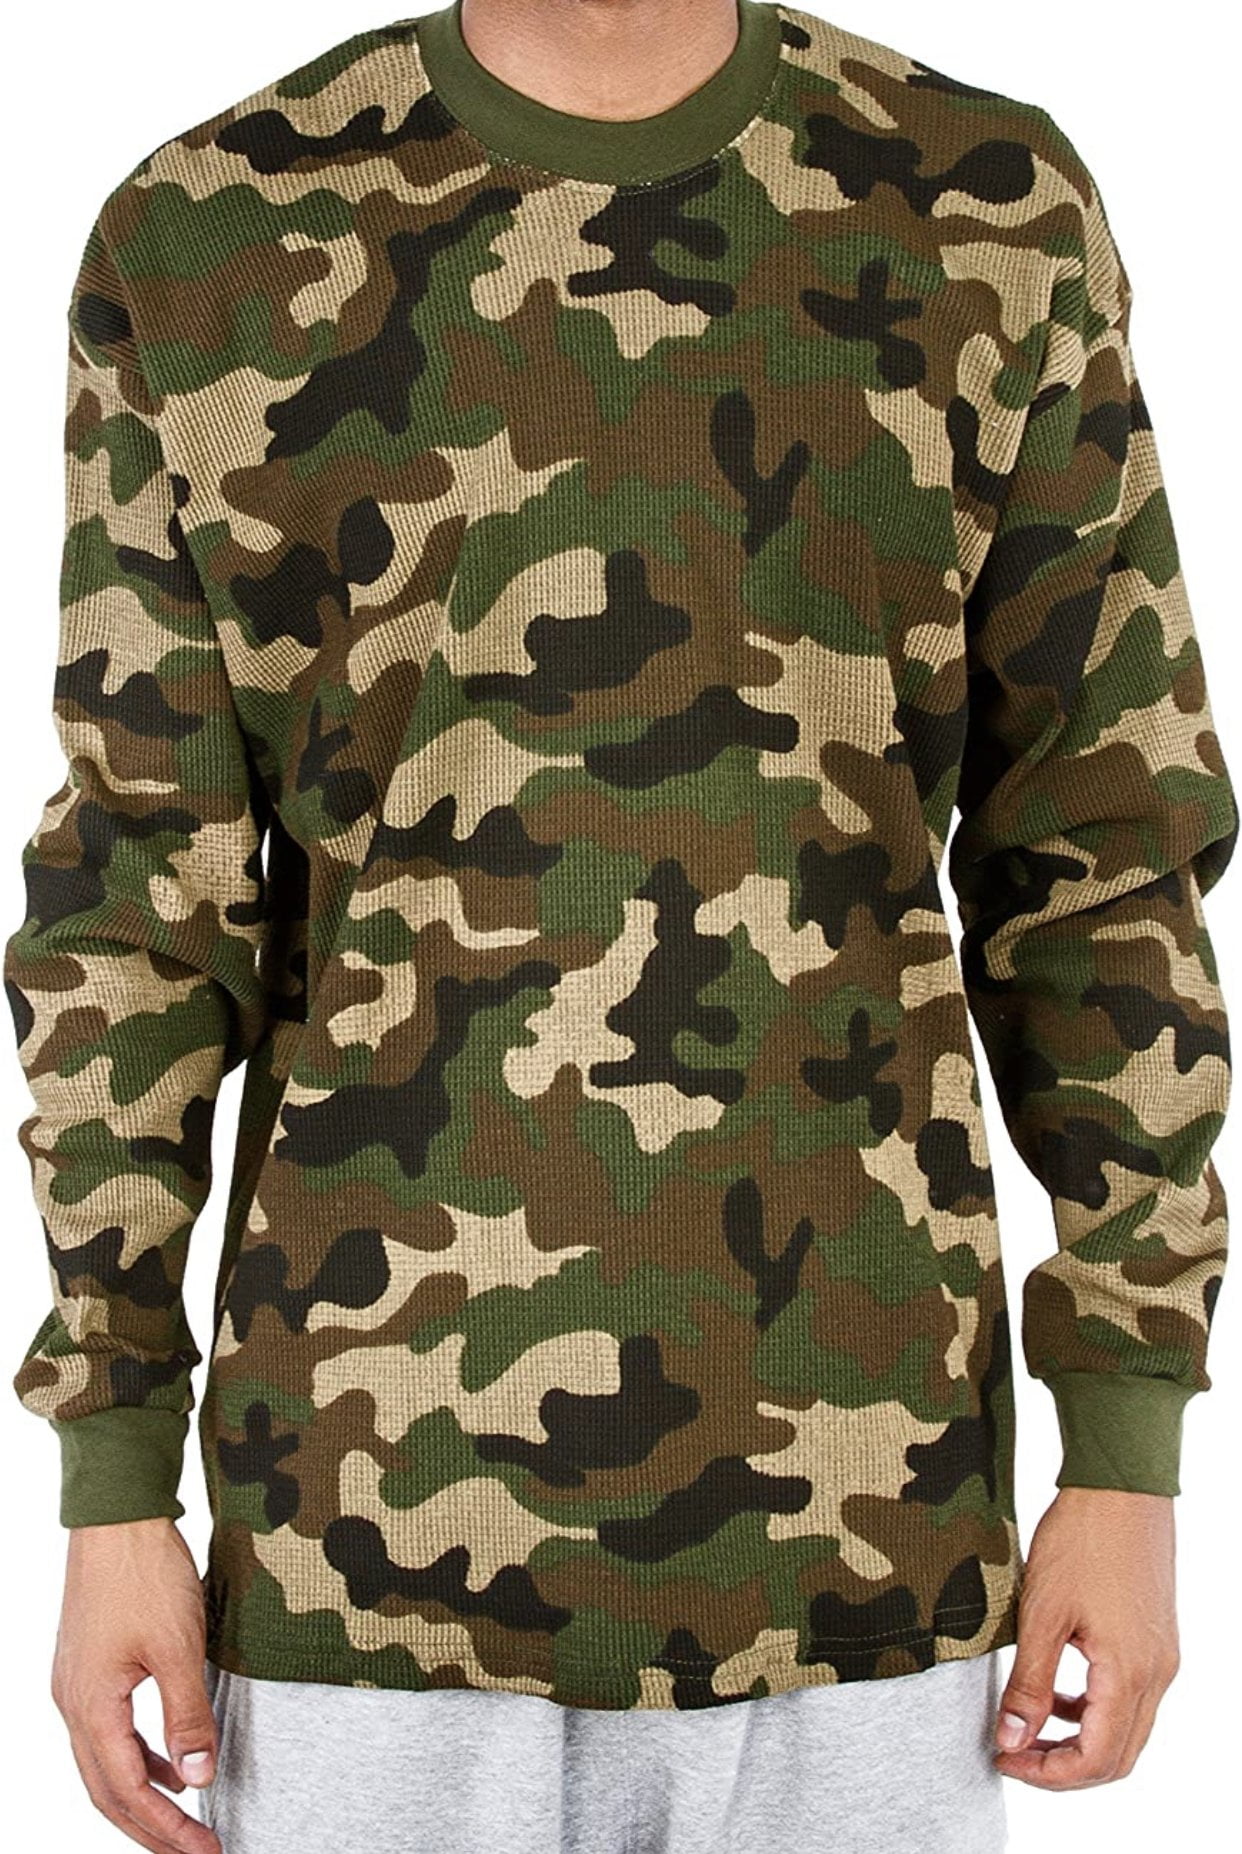 Stanley Shirt Adult XL Camo Waffle Knit Thermal Casual Long Sleeve Mens